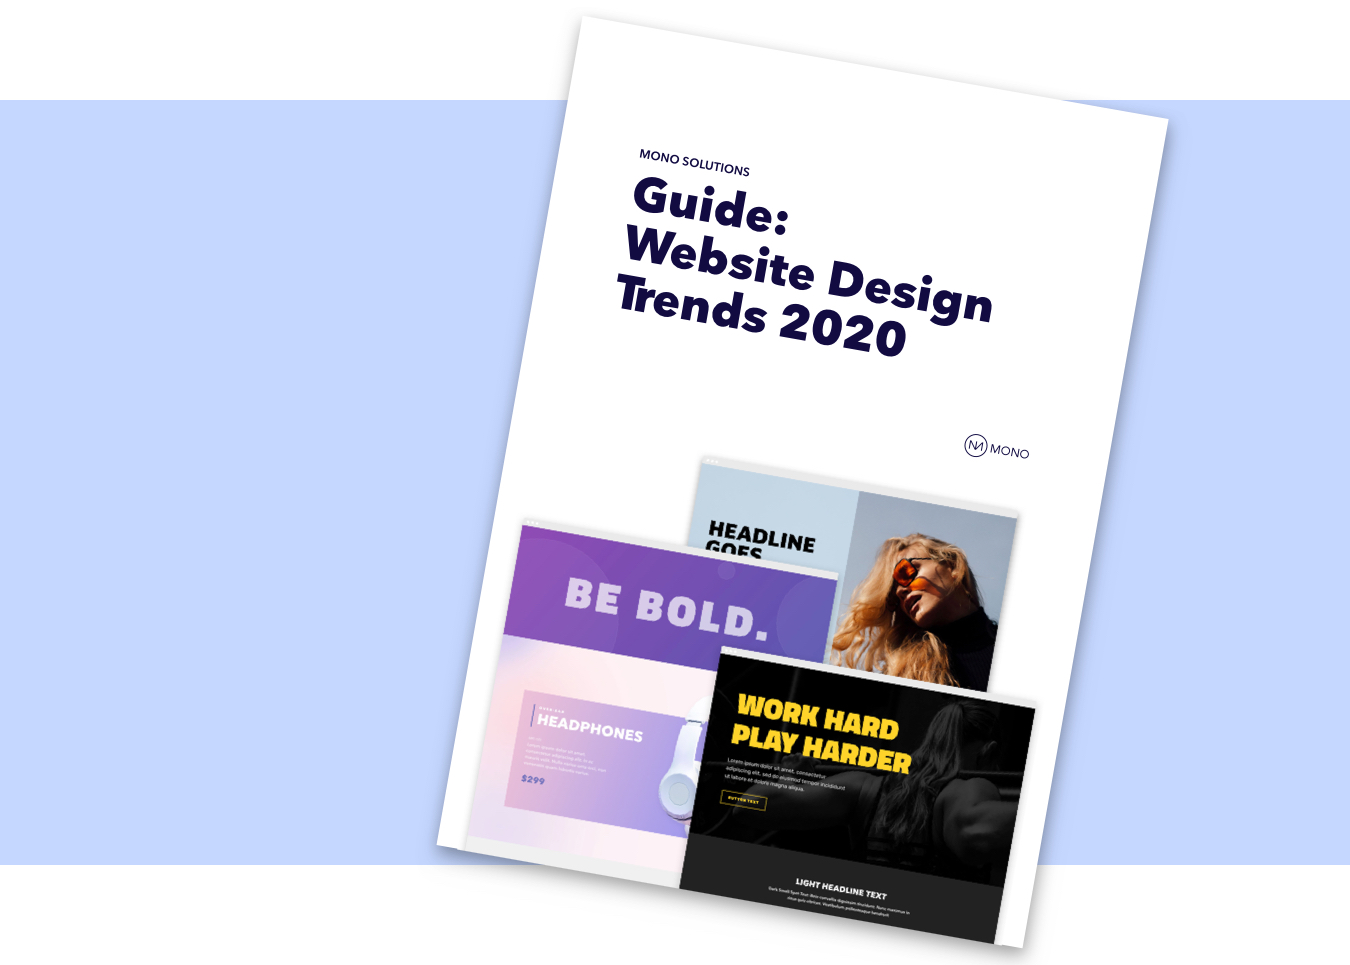 Guide about web design trends in 2020